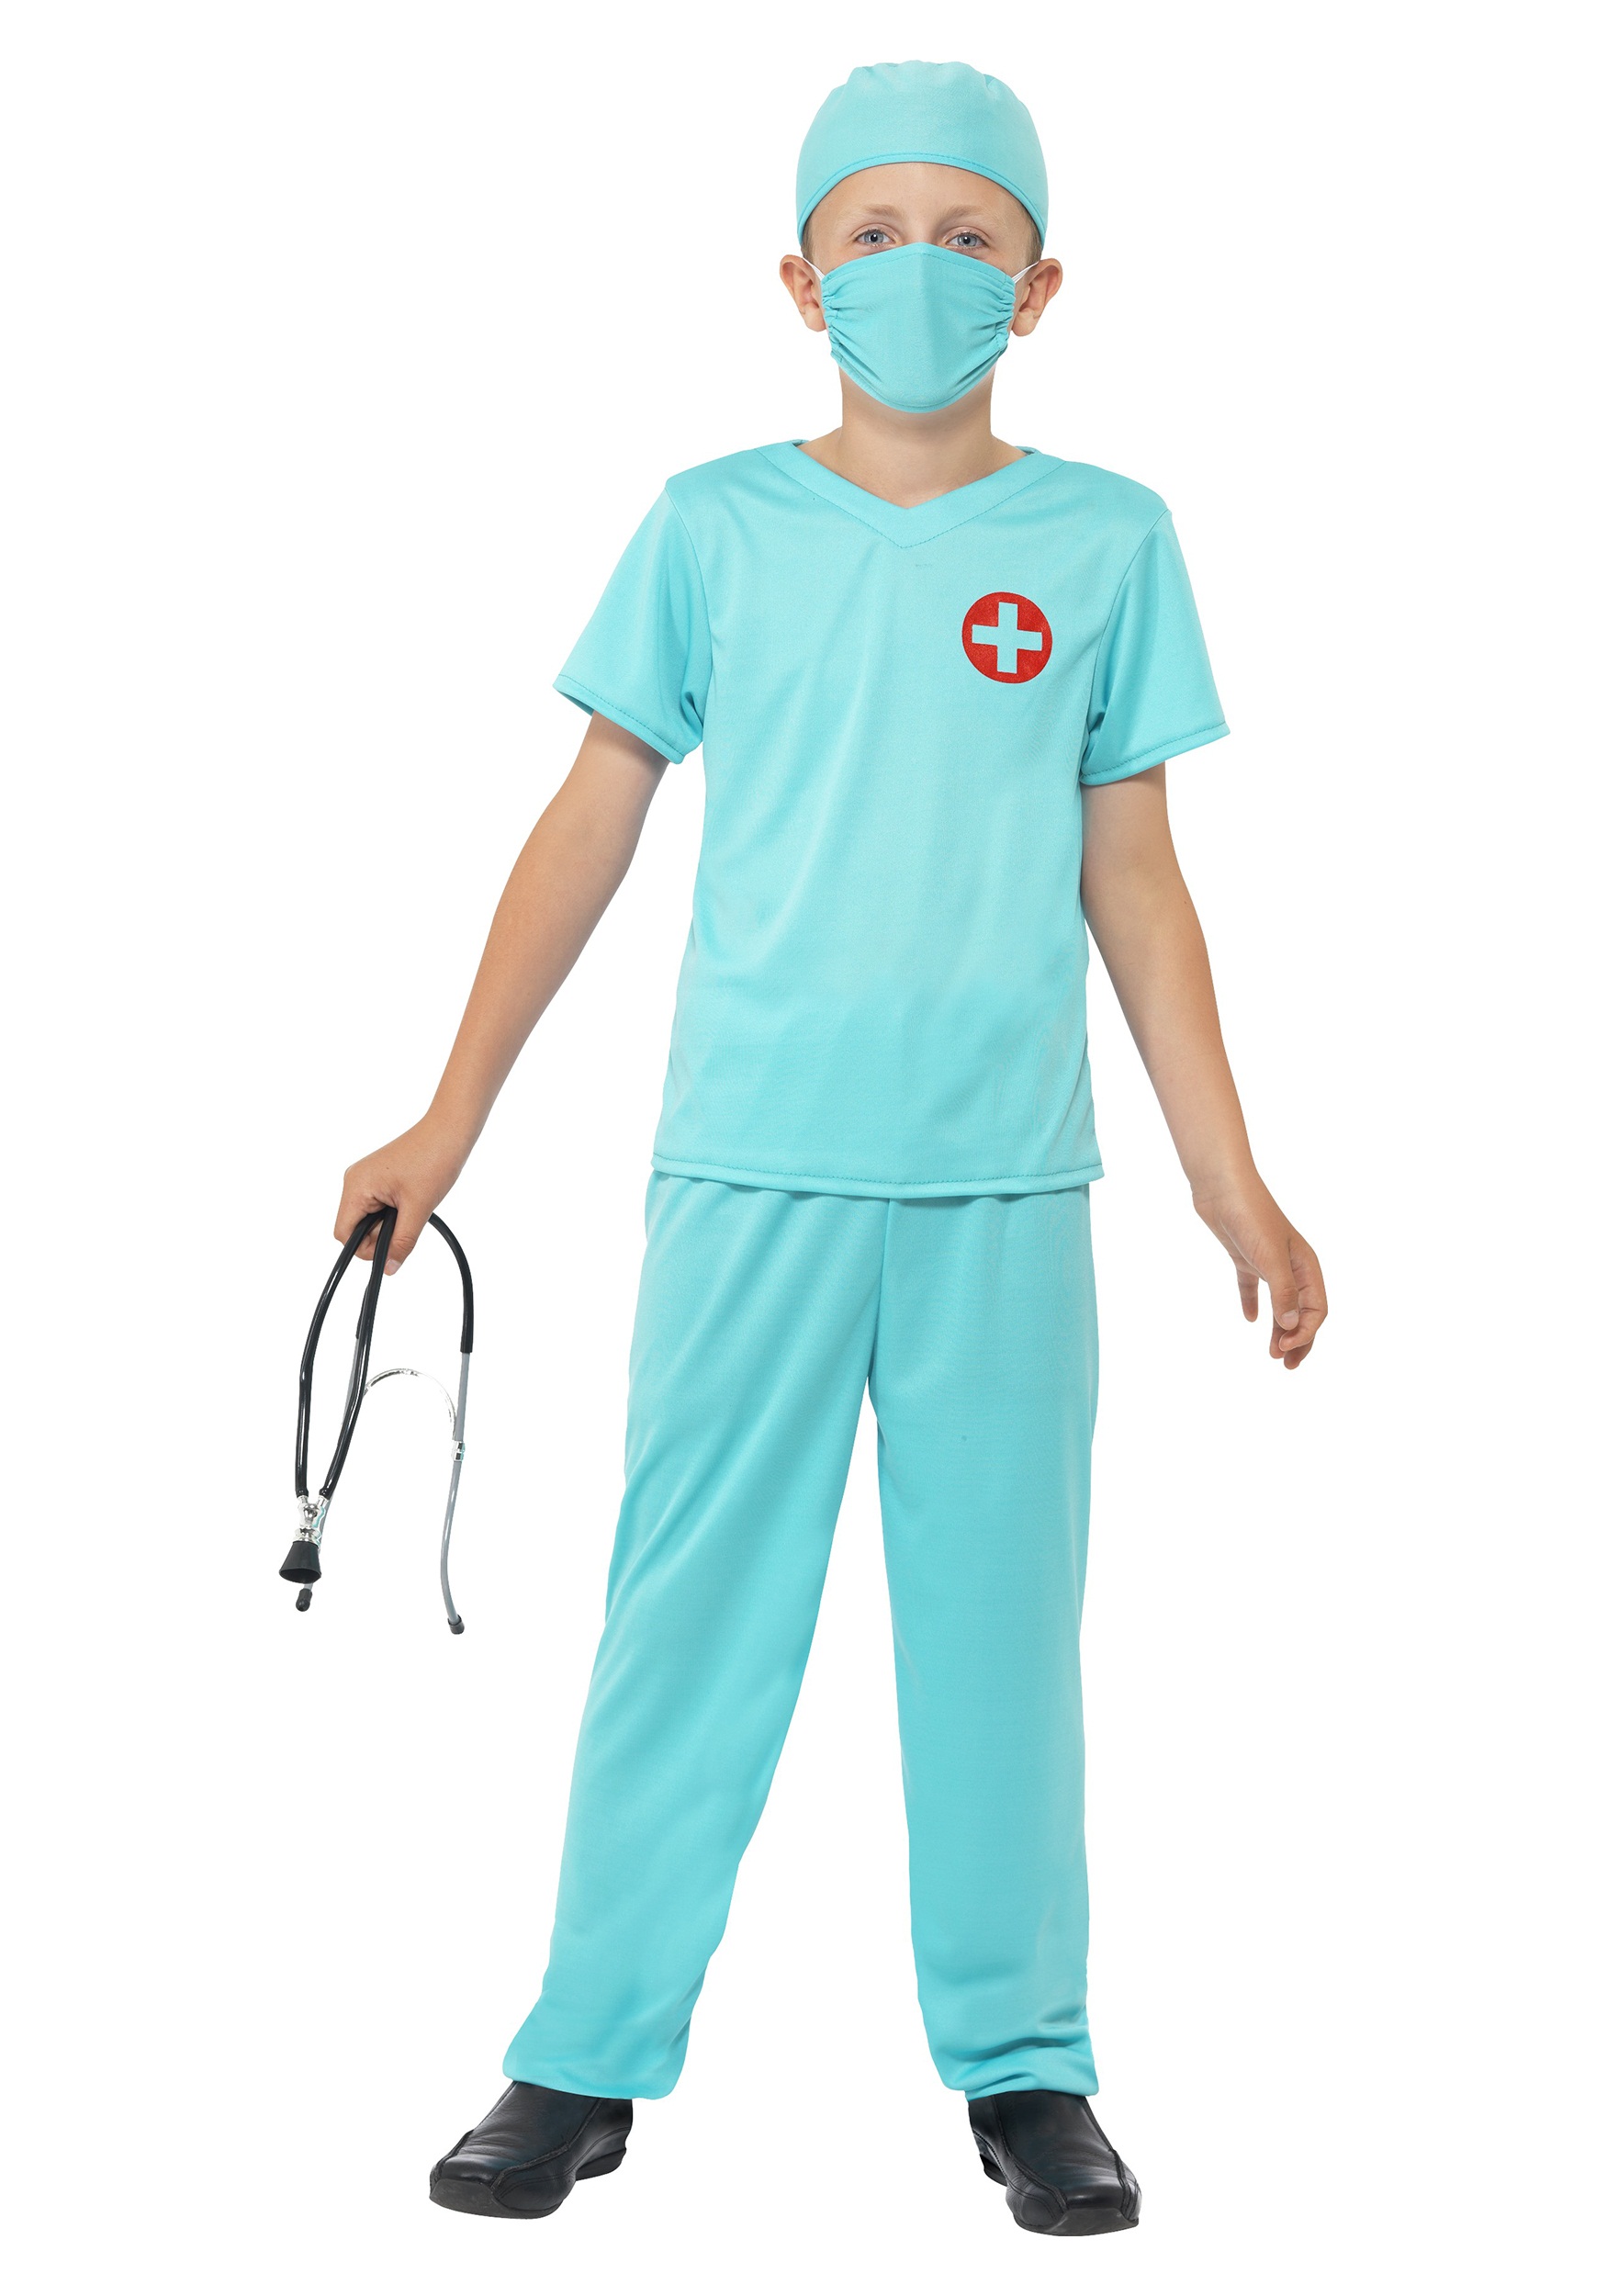 Surgeon Boys Fancy Dress Doctor Uniform Occupations Childrens Kid Costume Outfit